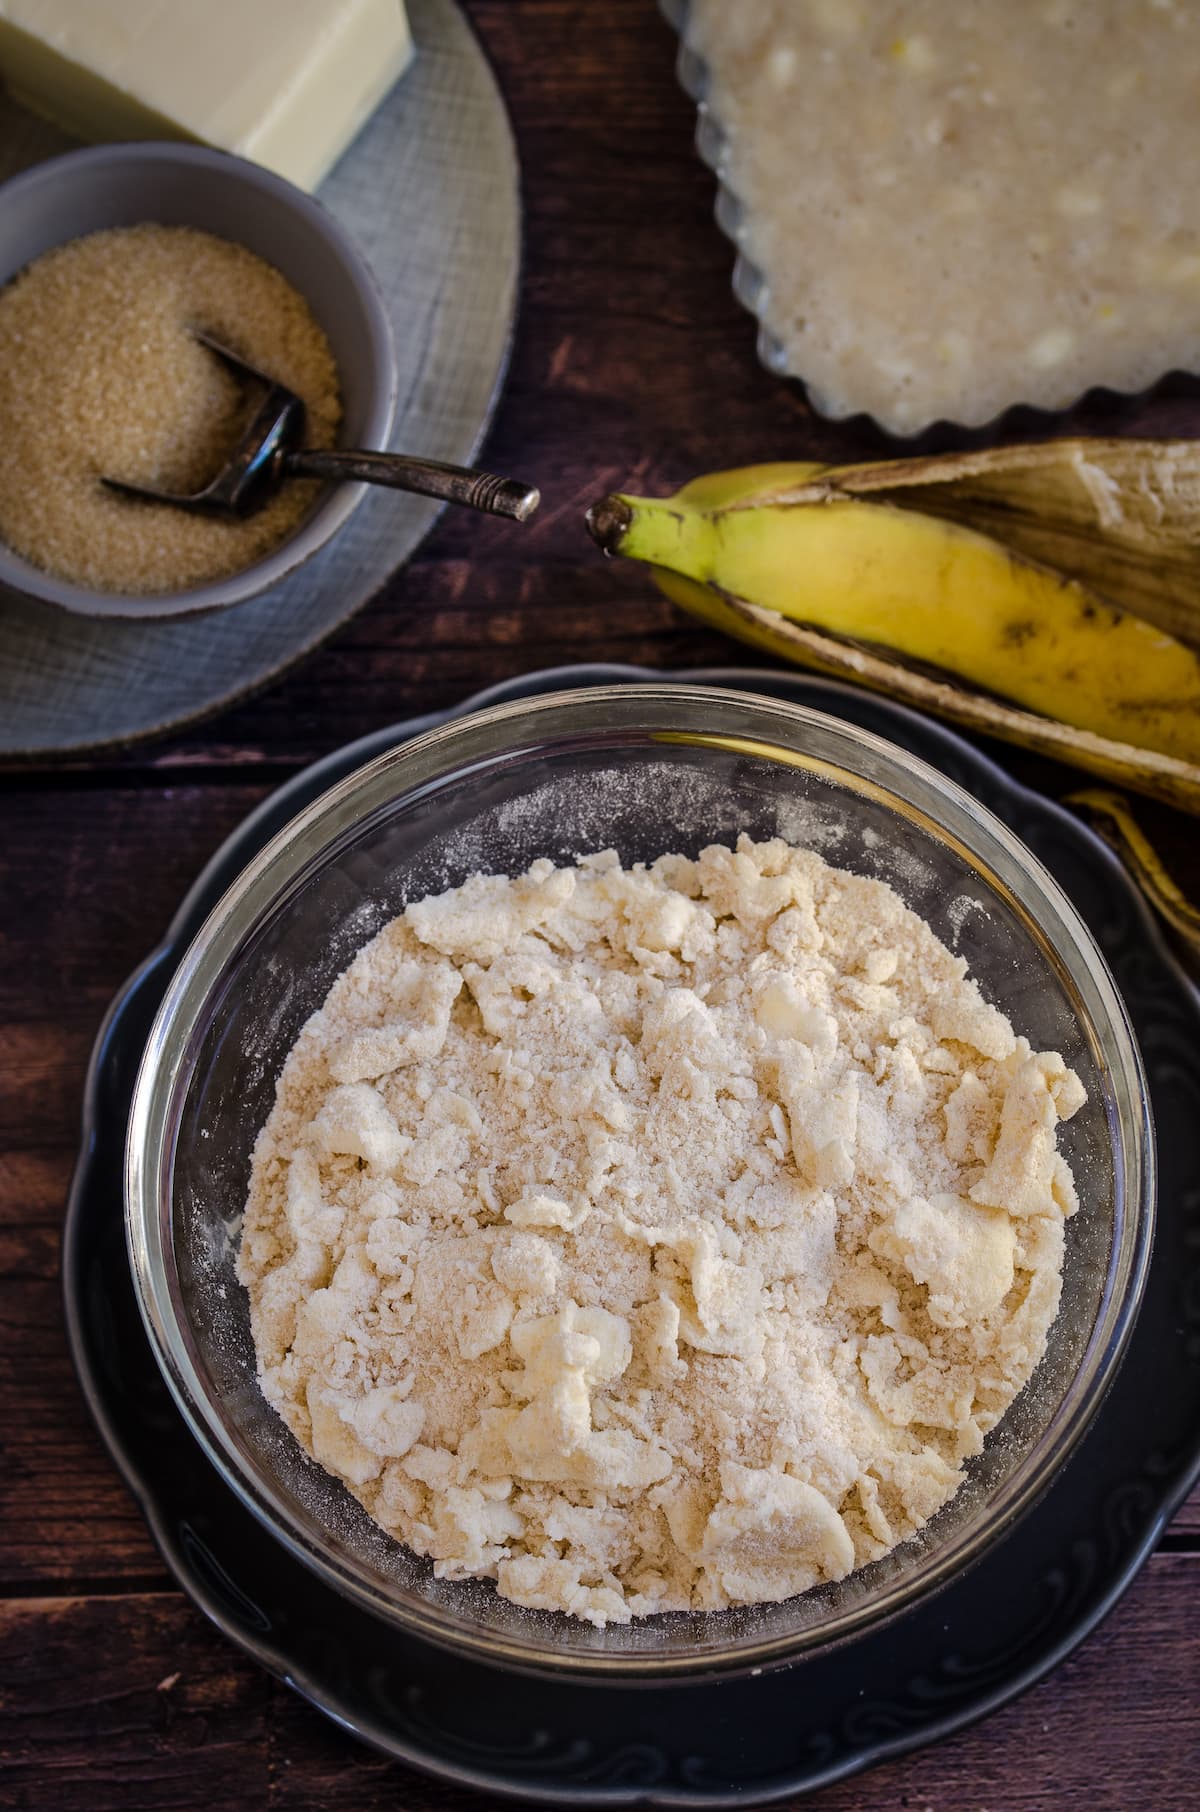 A bowl of dry ingredients being made into banana cake